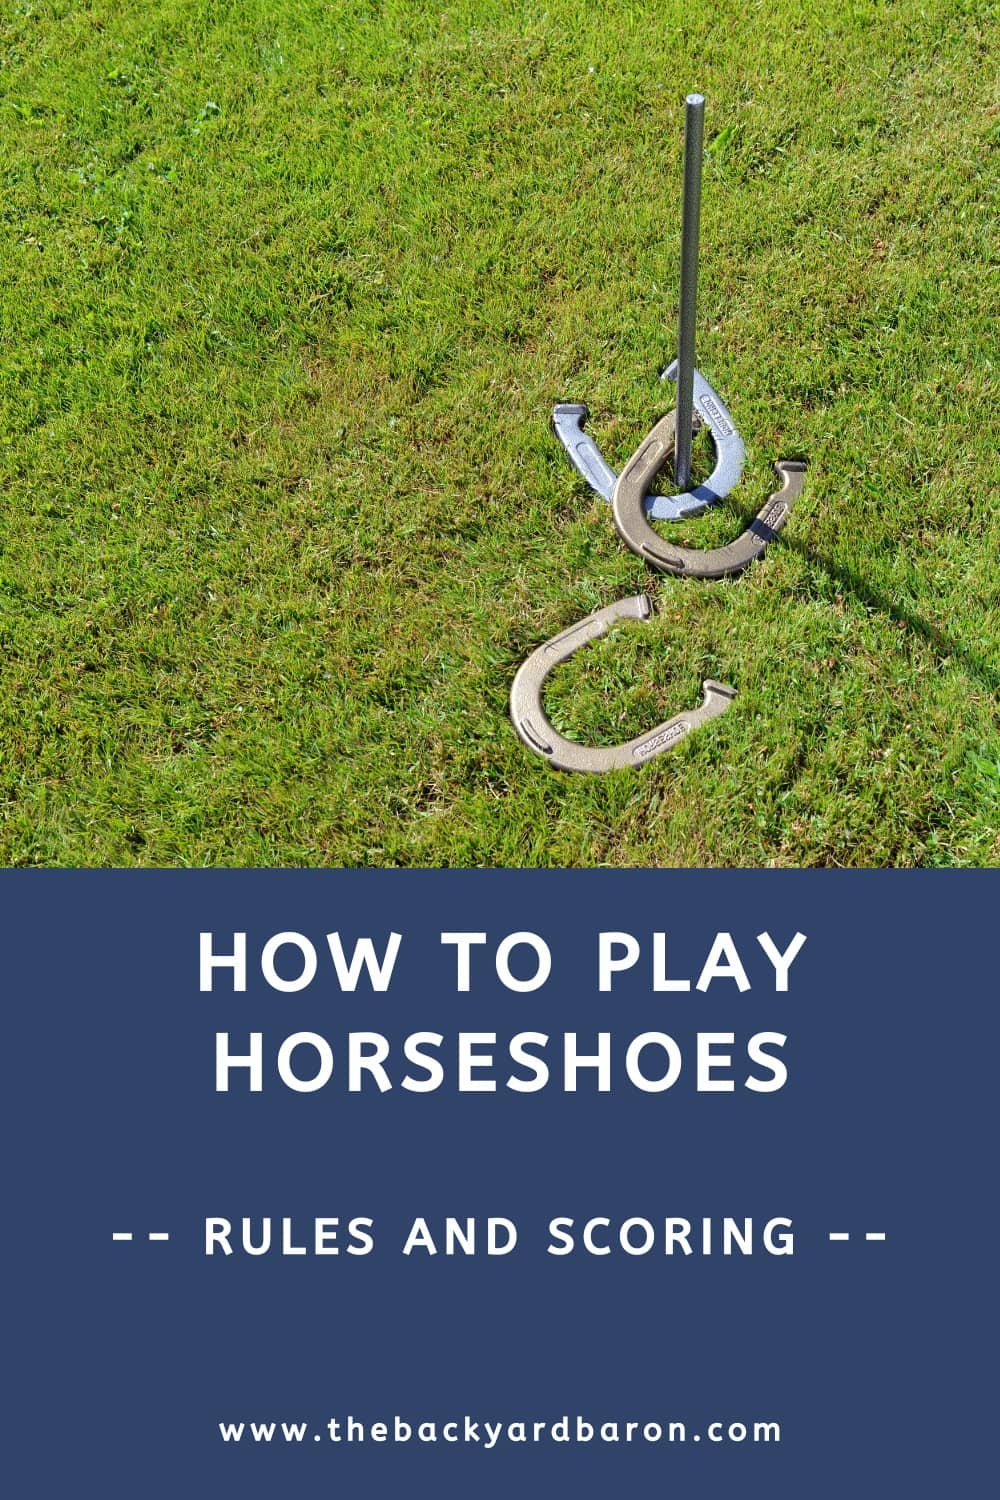 How to play horseshoe pitching (rules and scoring)